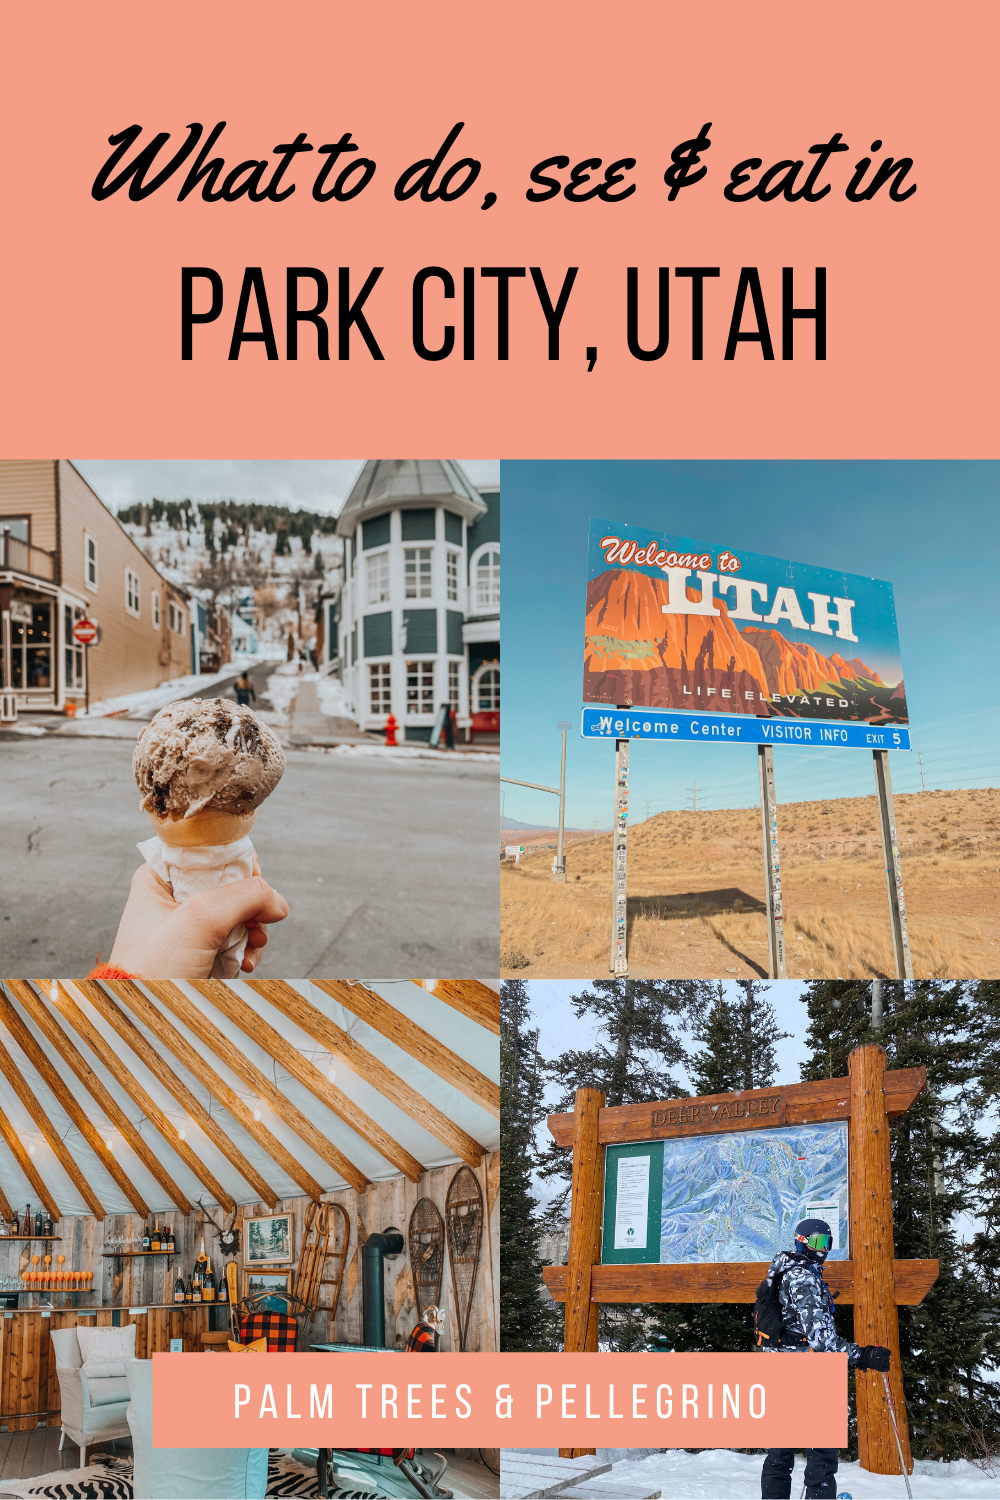 Park City Travel Guide, things to do in Utah - Palm Trees and Pellegrino travel tips